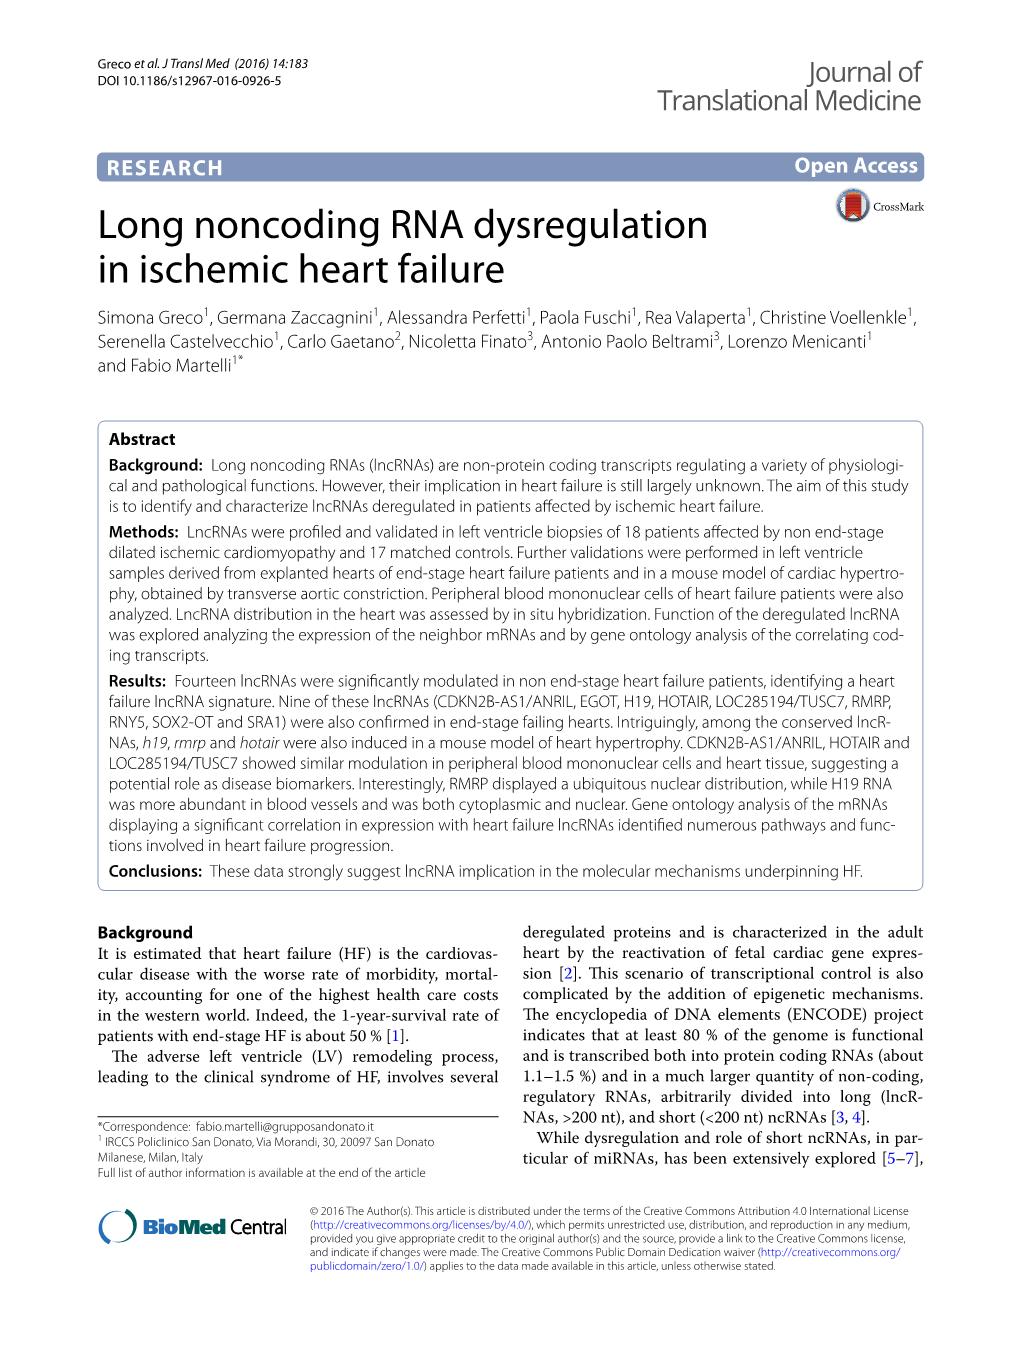 Long Noncoding RNA Dysregulation in Ischemic Heart Failure